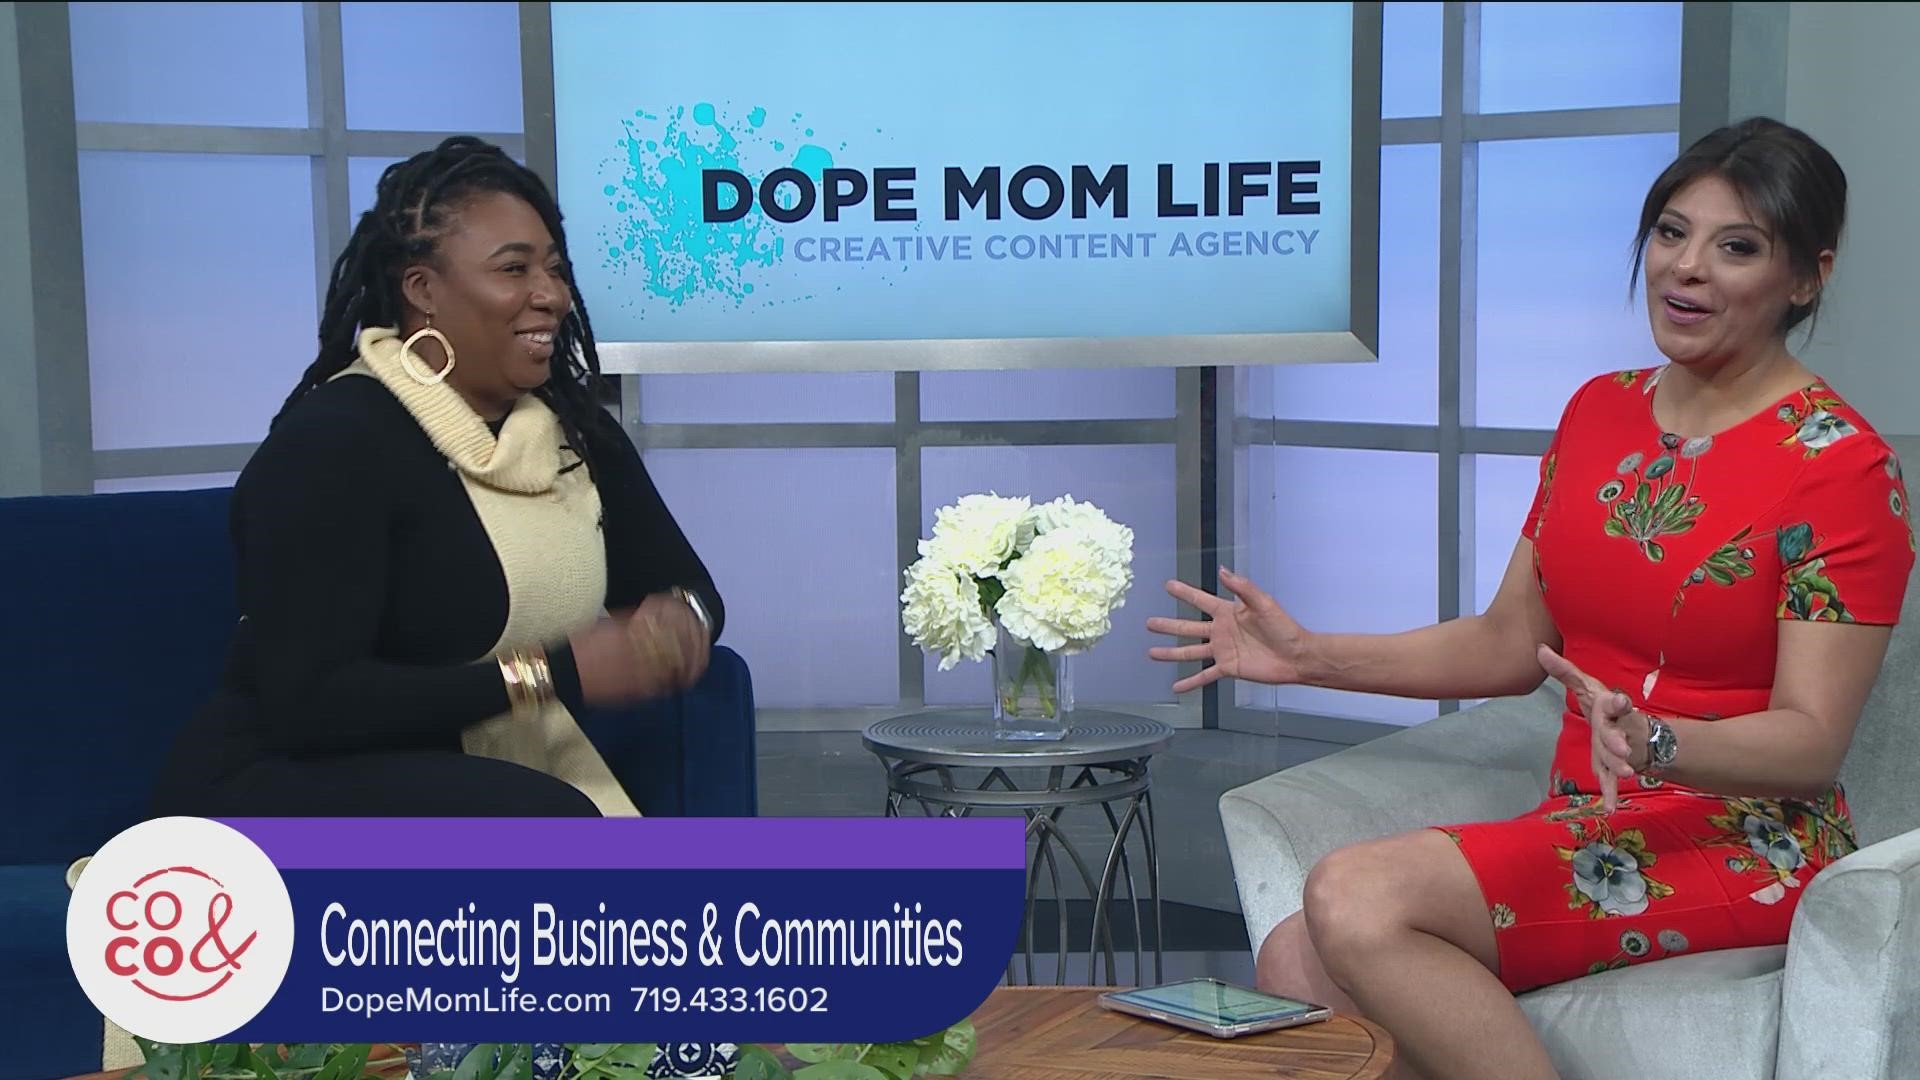 Dope Mom Life helps organizations engage with their communities through video. Learn more at DopeMomLife.com.